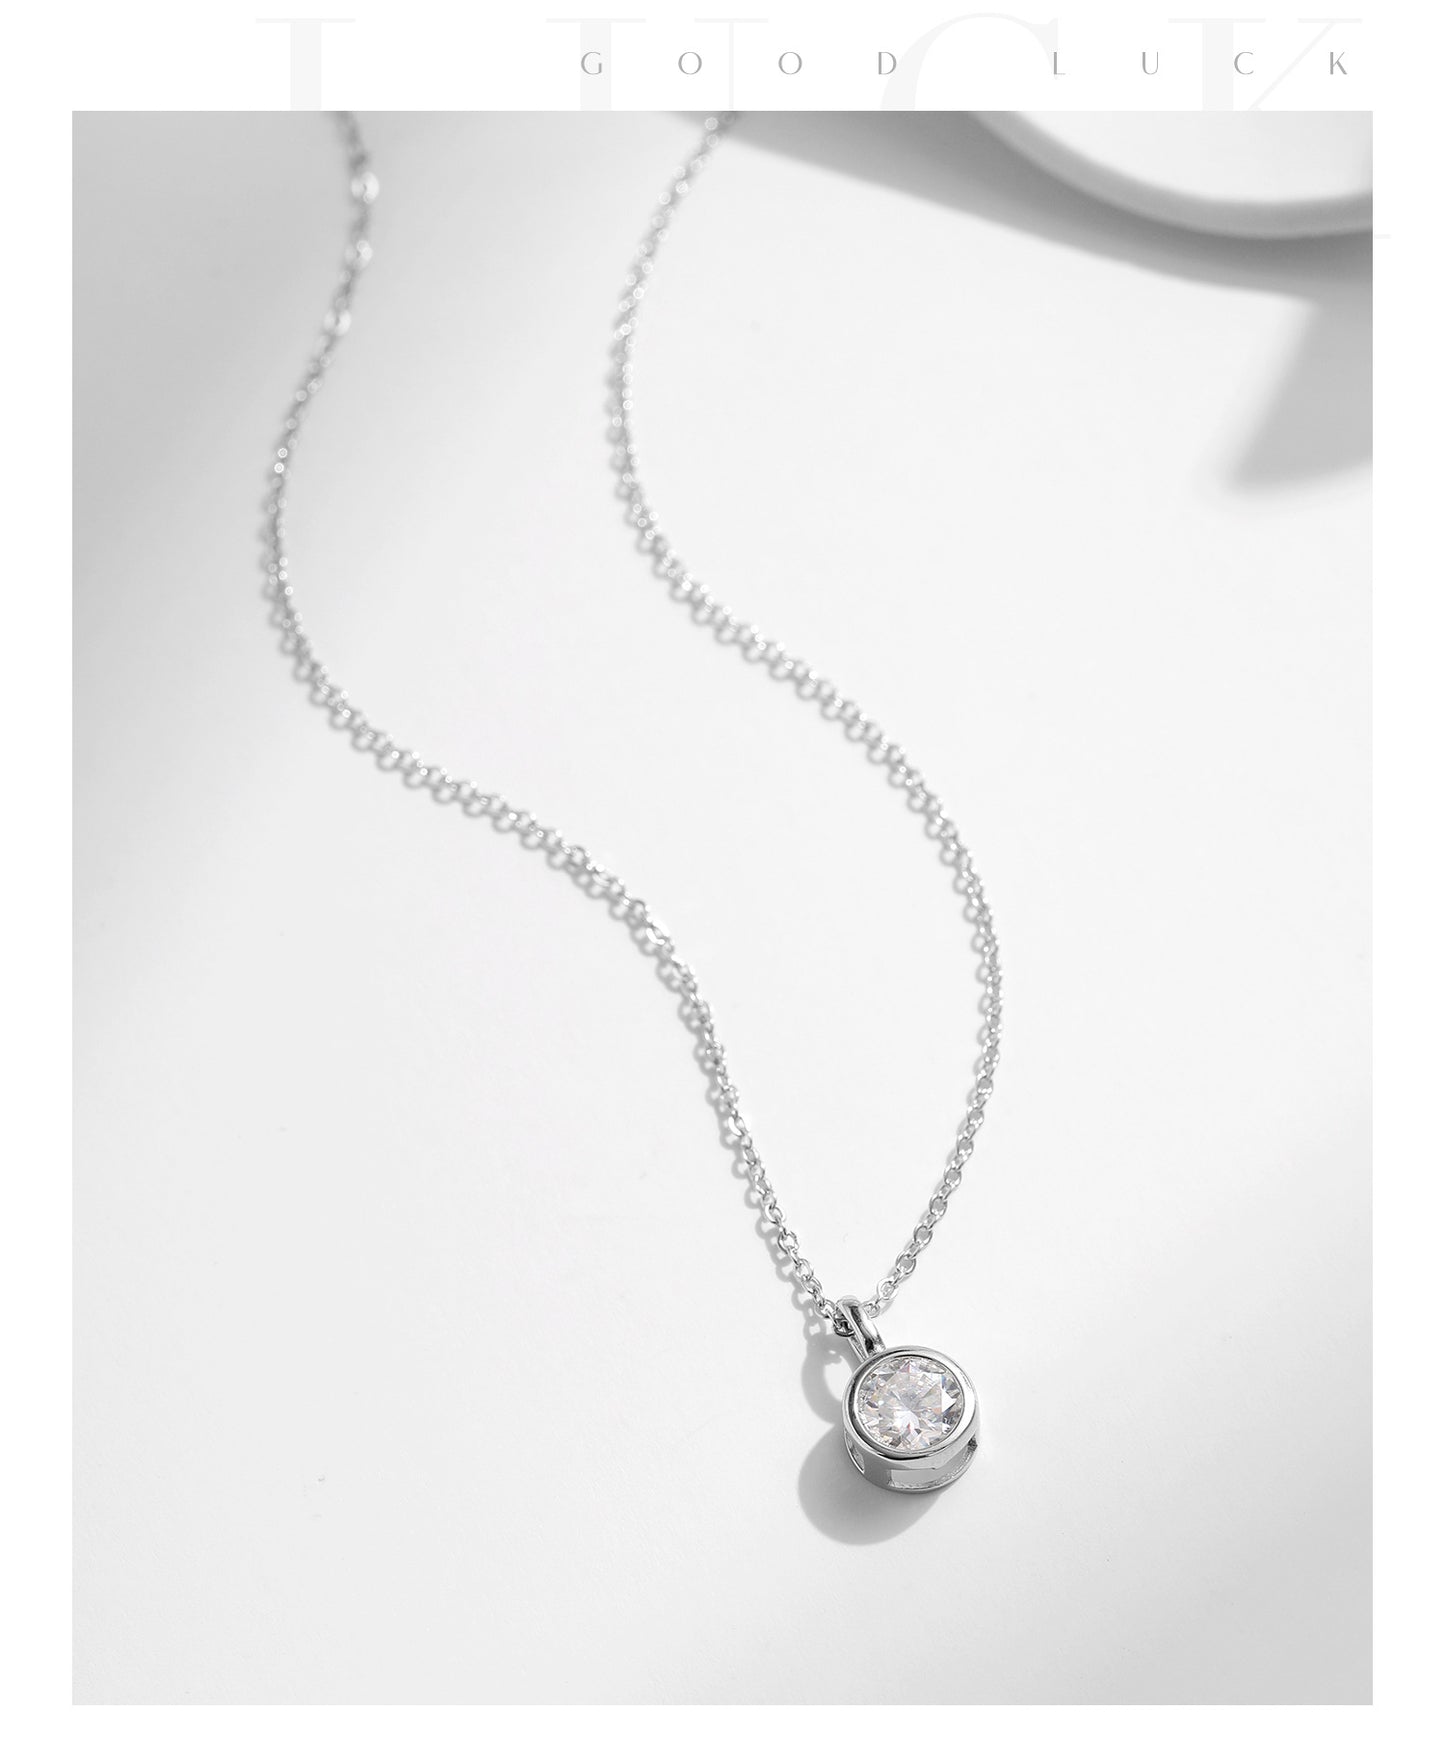 Minimalist D-color Moissanite Necklace with Sterling Silver Chain for Women